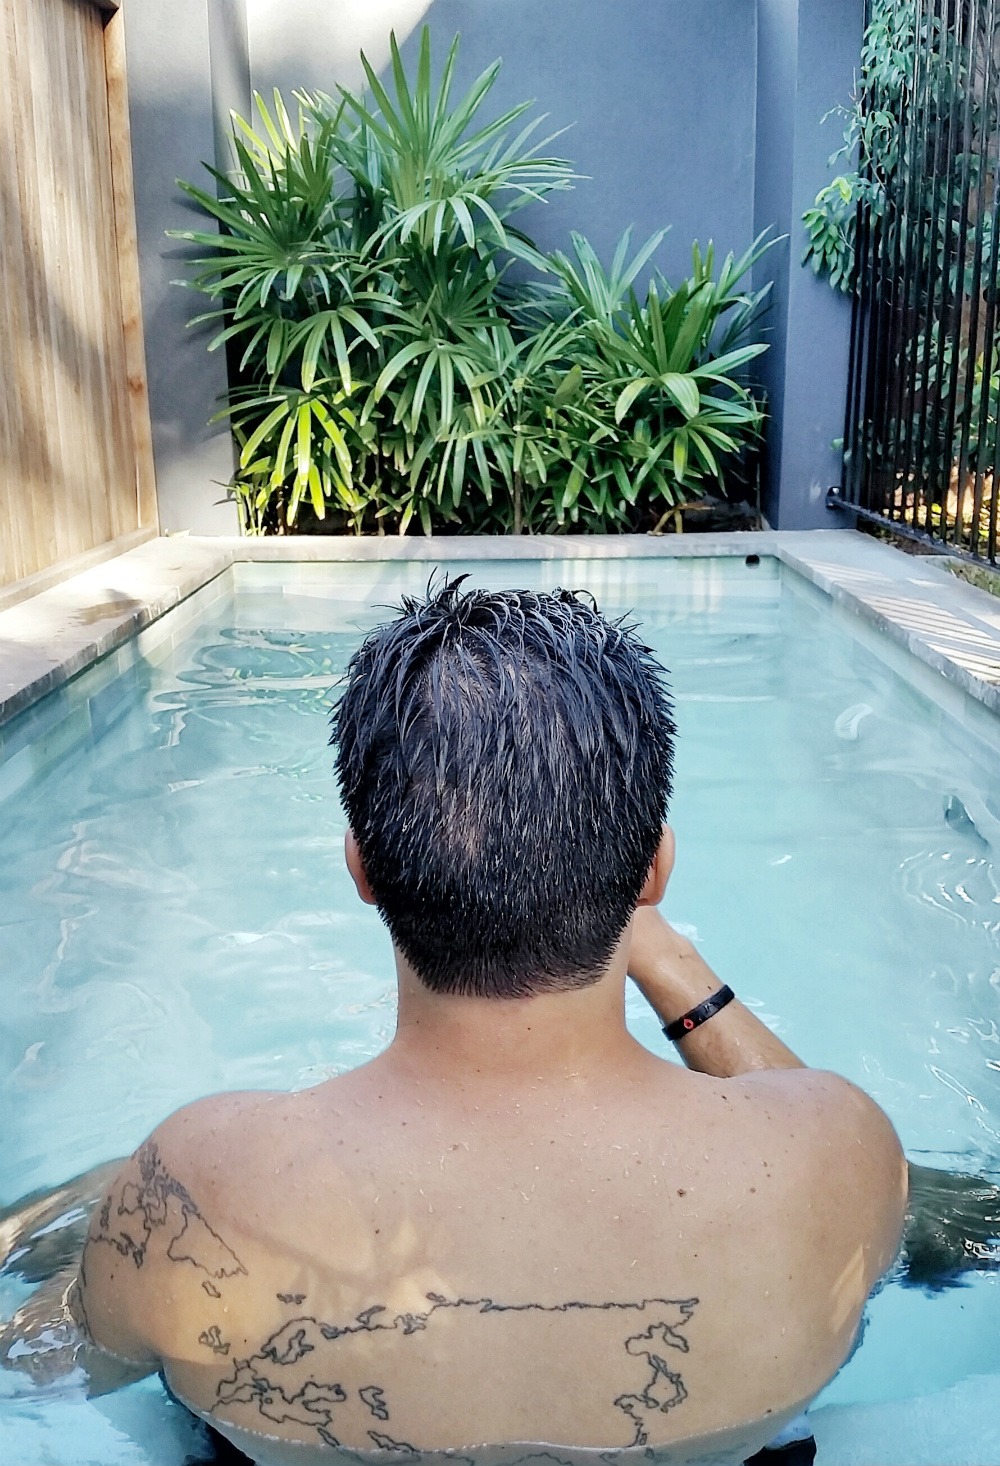 Boutique Byron Bay Accommodation: 28 Degrees Byron Bay Review - Pool